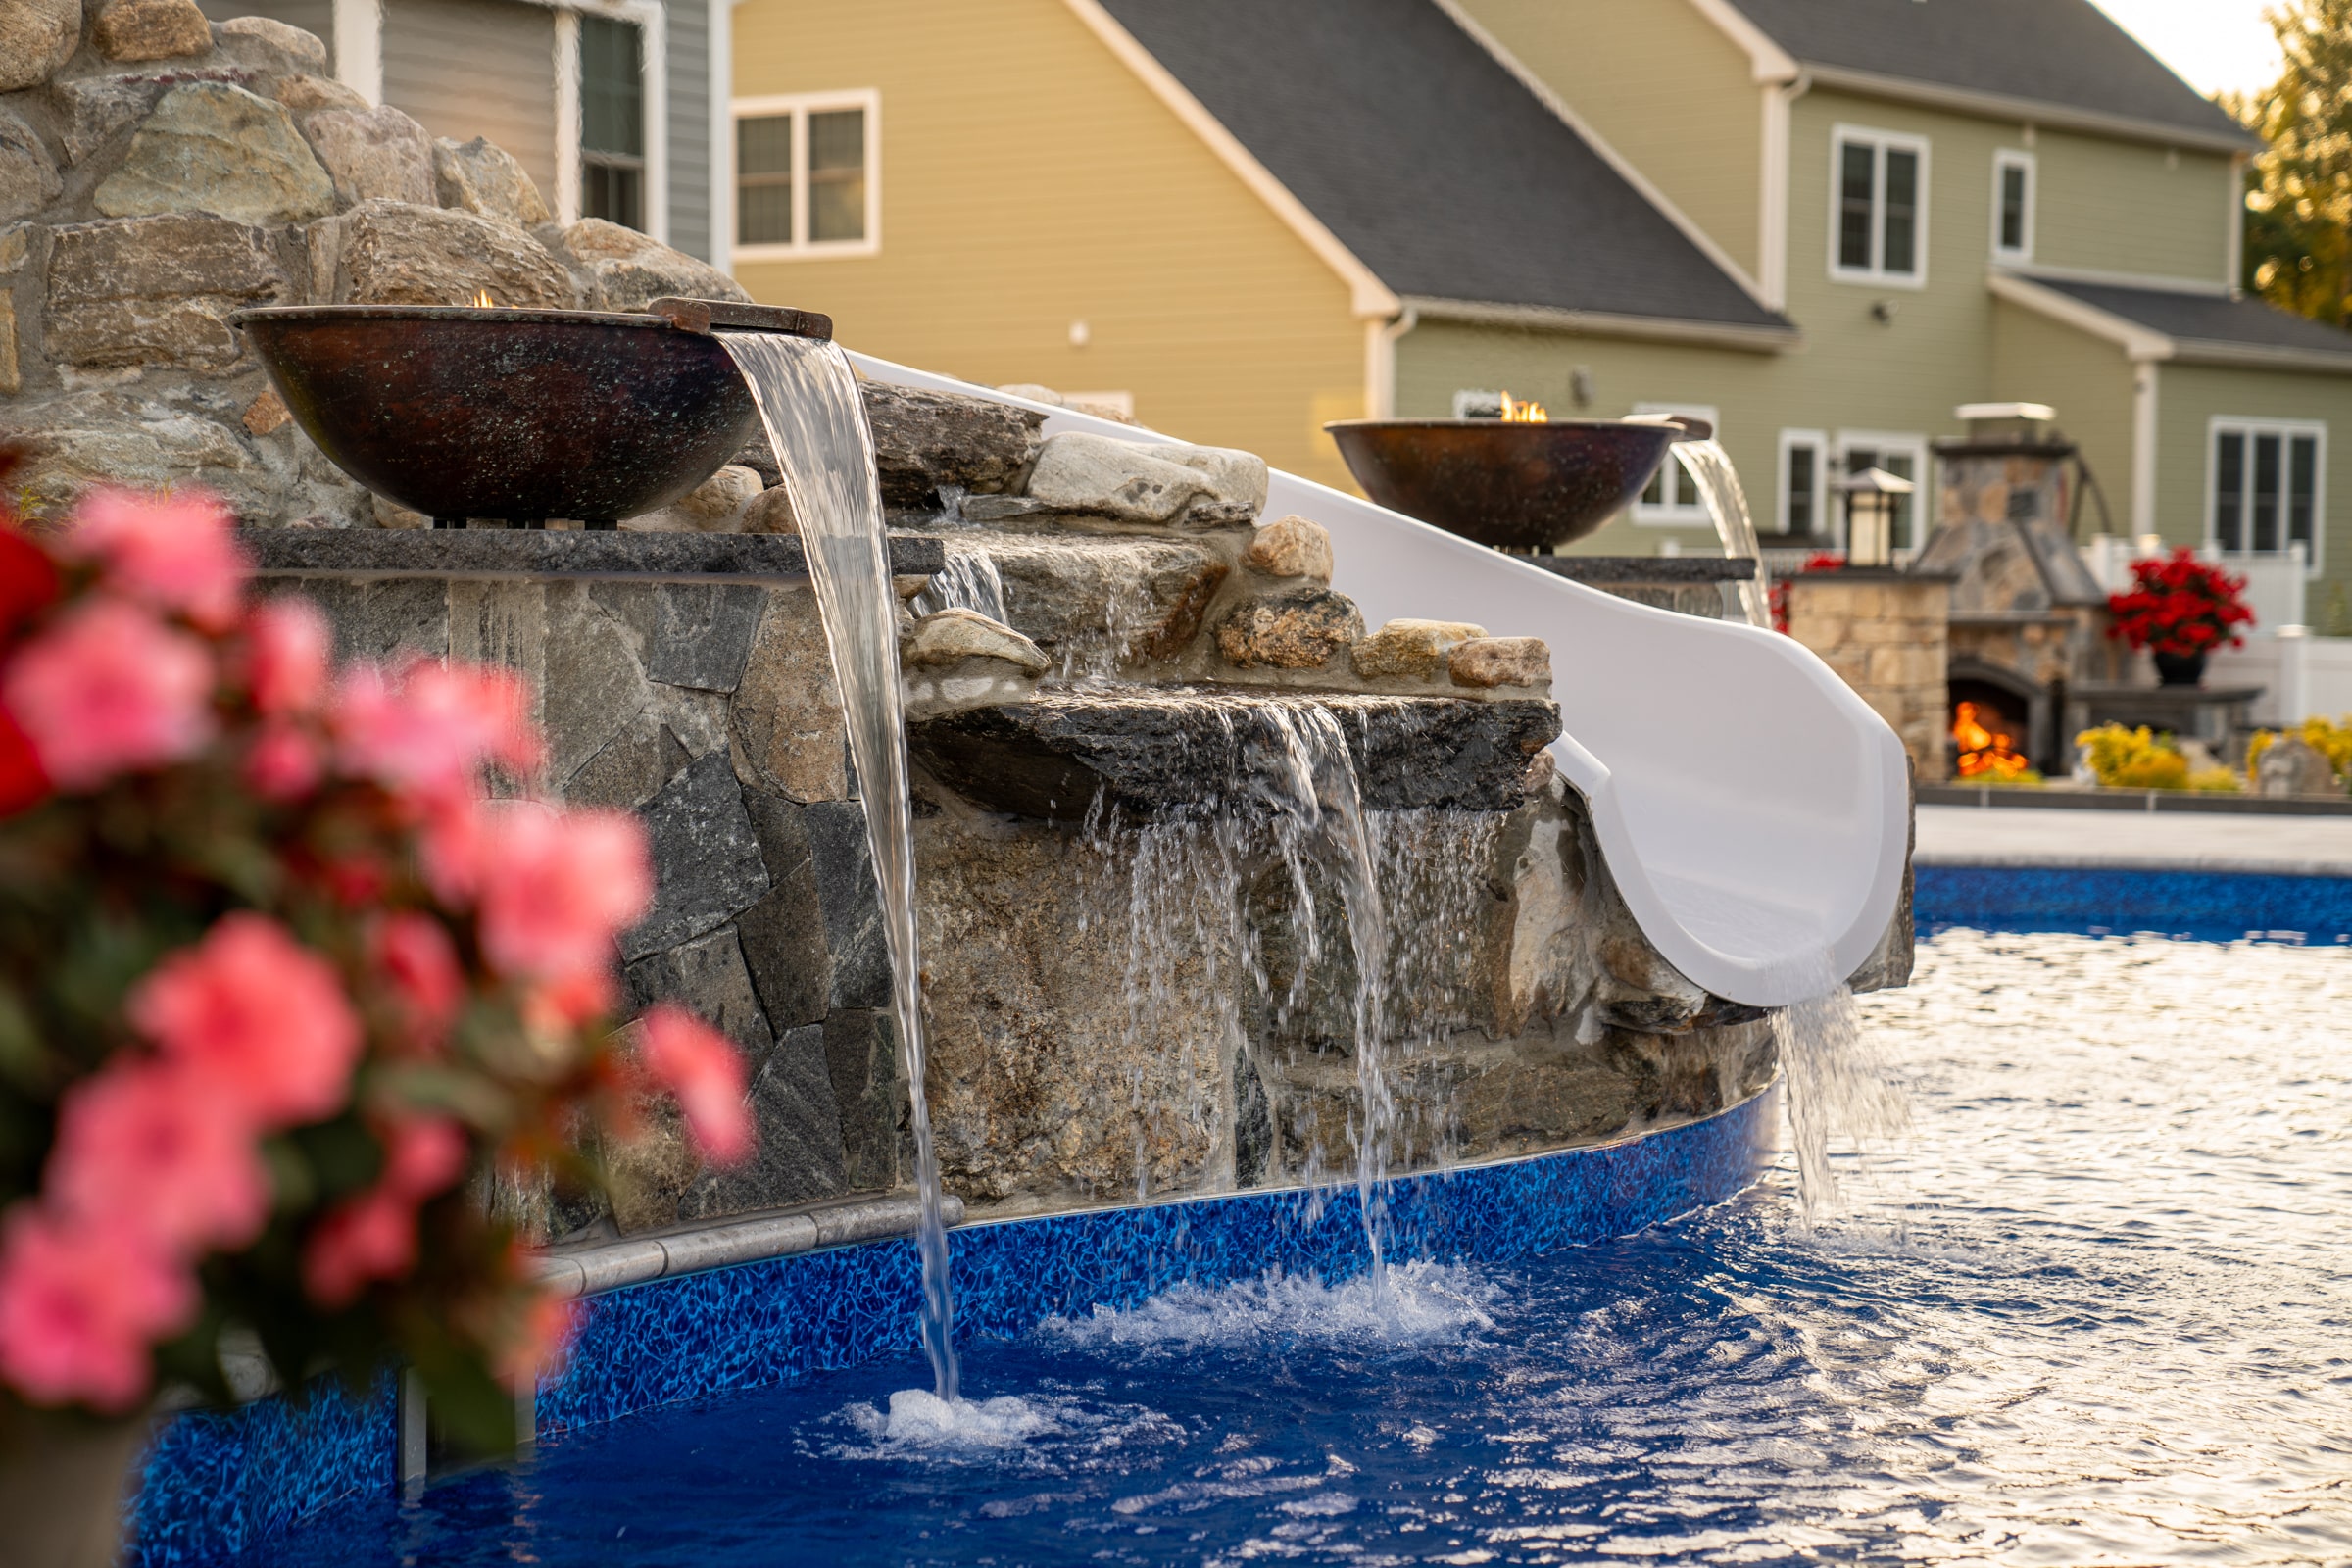 Water and fire features flank the custom waterslide built by Dex by Terra in Grafton, Massachusetts.